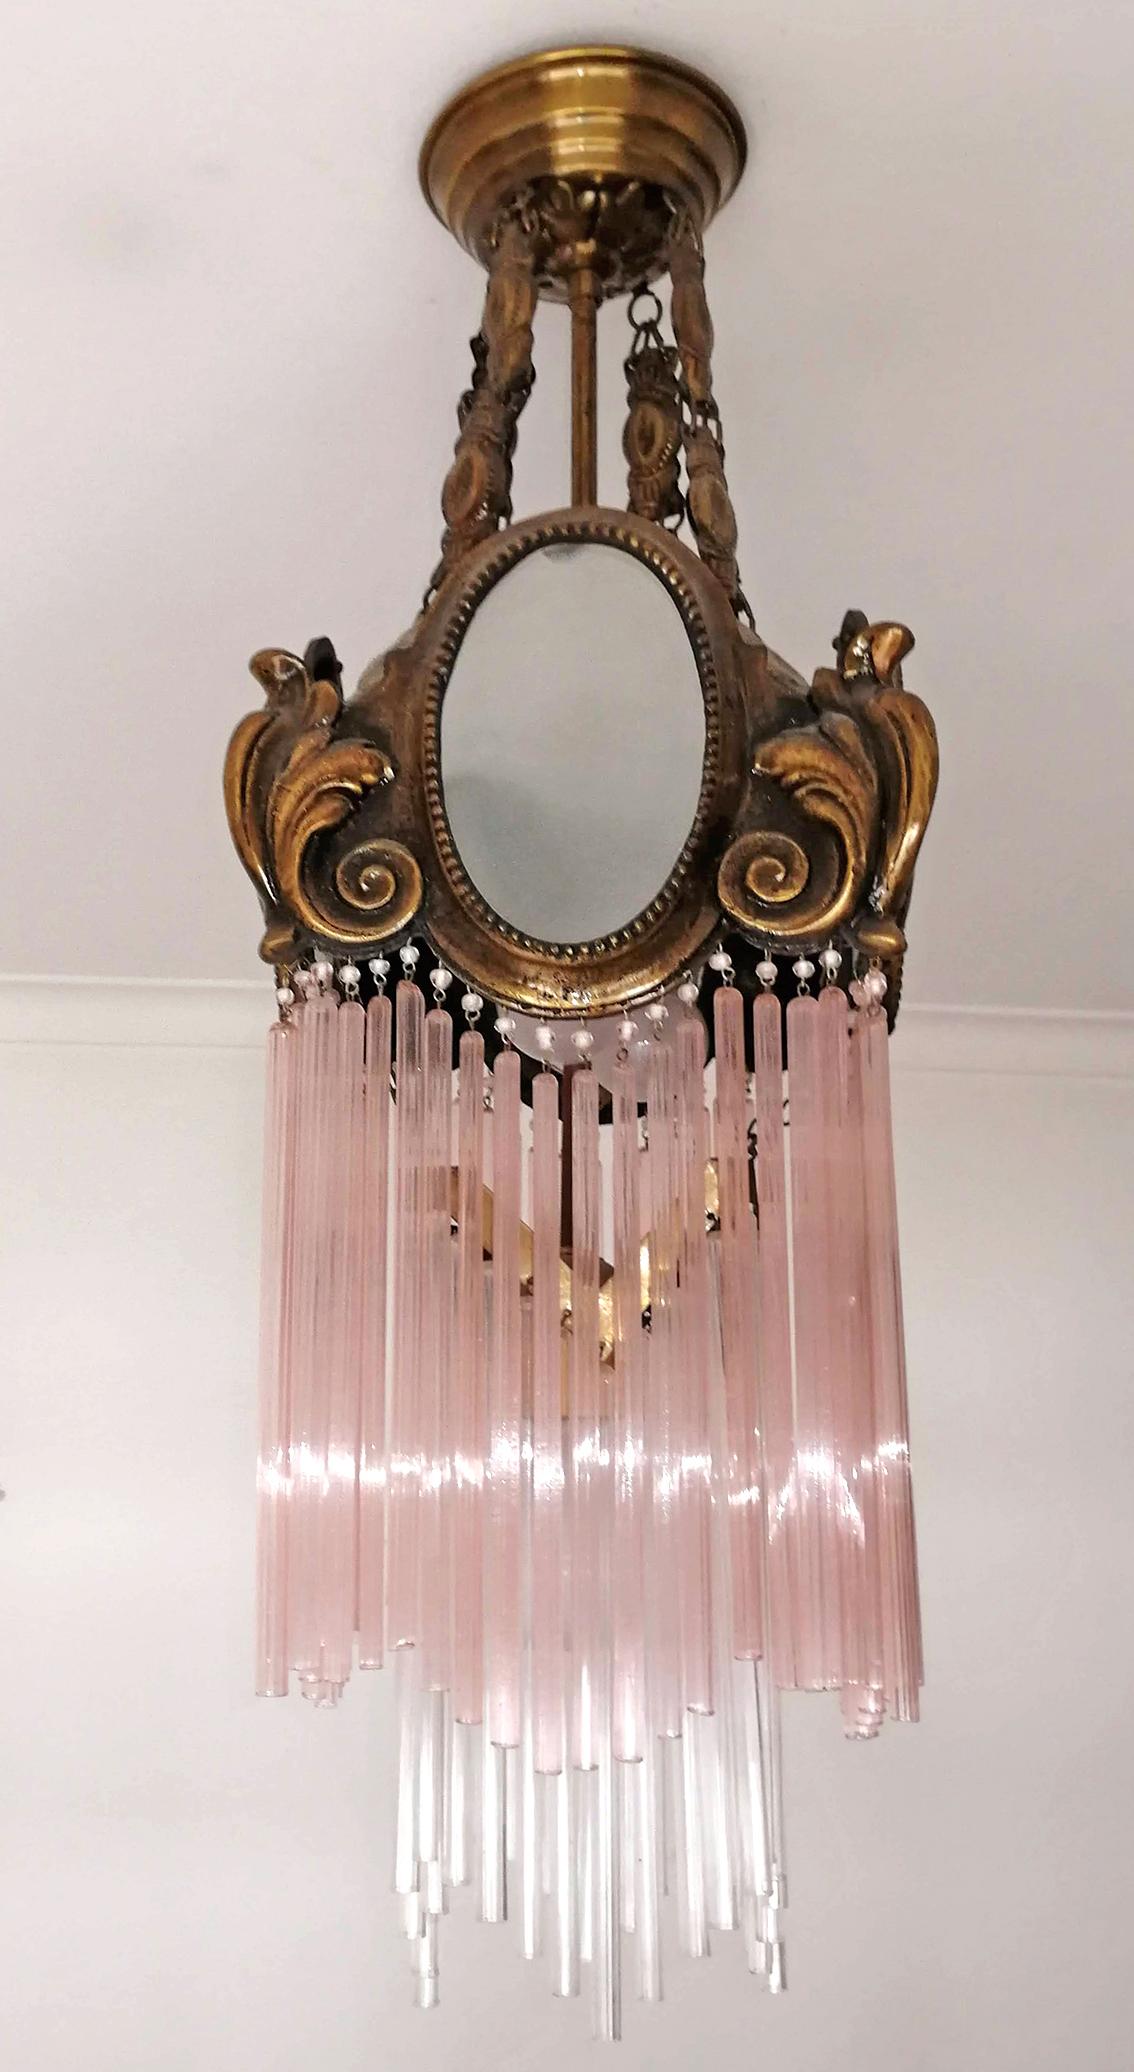 Beautiful antique French Art Nouveau Art Deco gilded bronze lantern and pink glass straw fringe, 2 tiers.
Measures:
Depth 8.7 in /22 cm
Width 8.7 in /22 cm
Diagonal 12 in/ 30 cm
Height 27.5 in / 70 cm
Weight 6 Kg / 12 lb
1-light bulbs E-27/